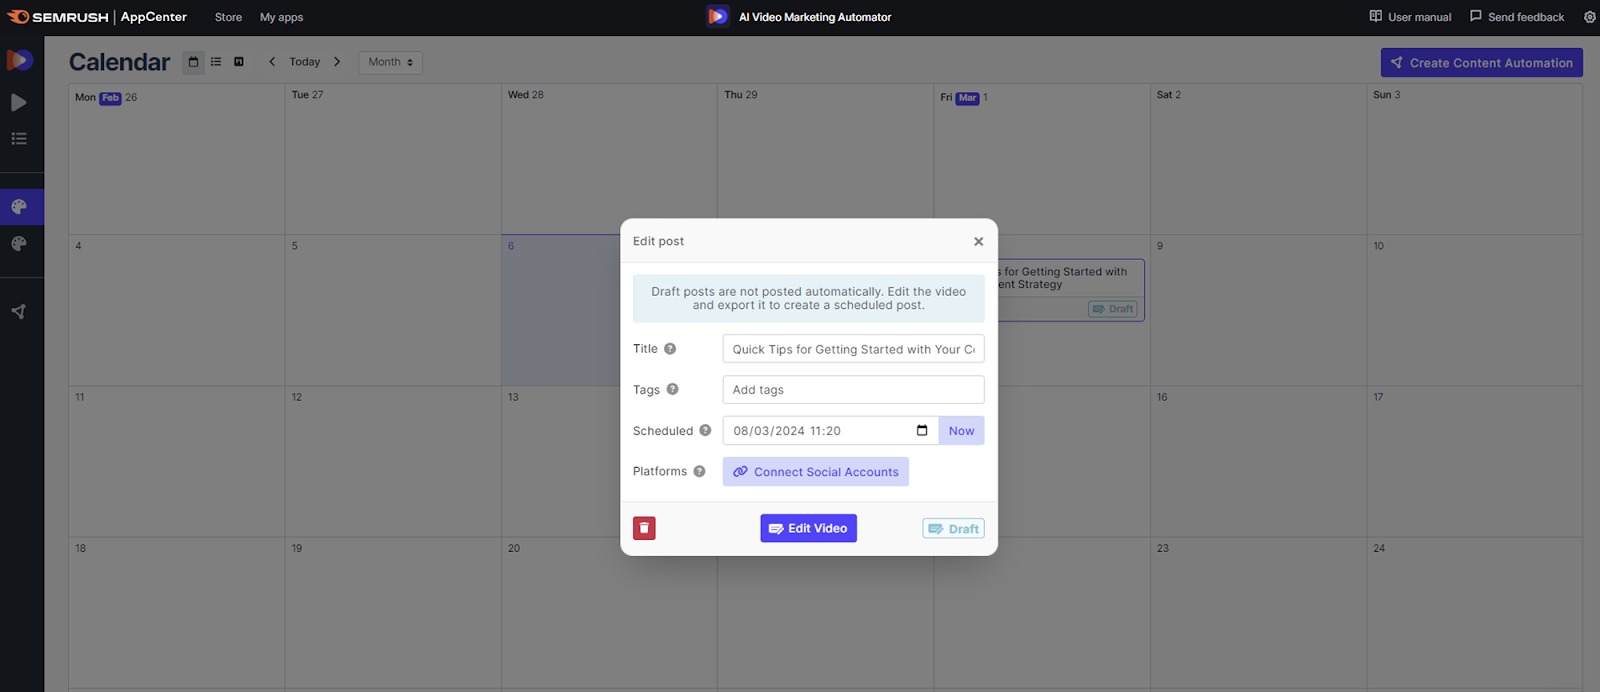 Scheduling your videos for publication on social media platforms in AI Video Marketing Automator.